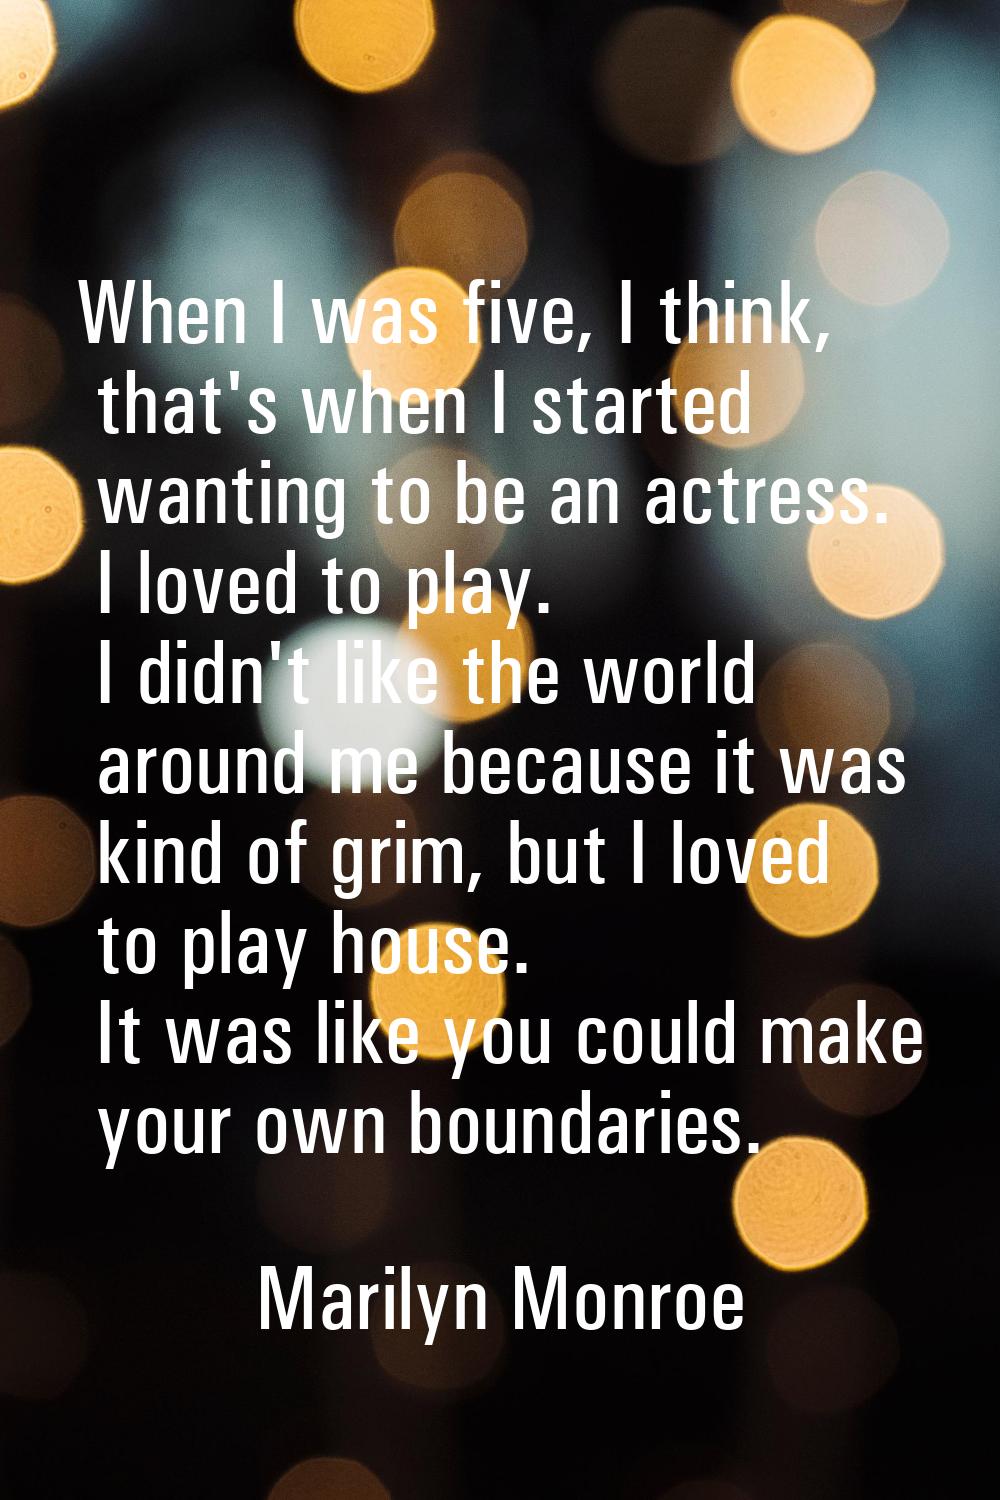 When I was five, I think, that's when I started wanting to be an actress. I loved to play. I didn't